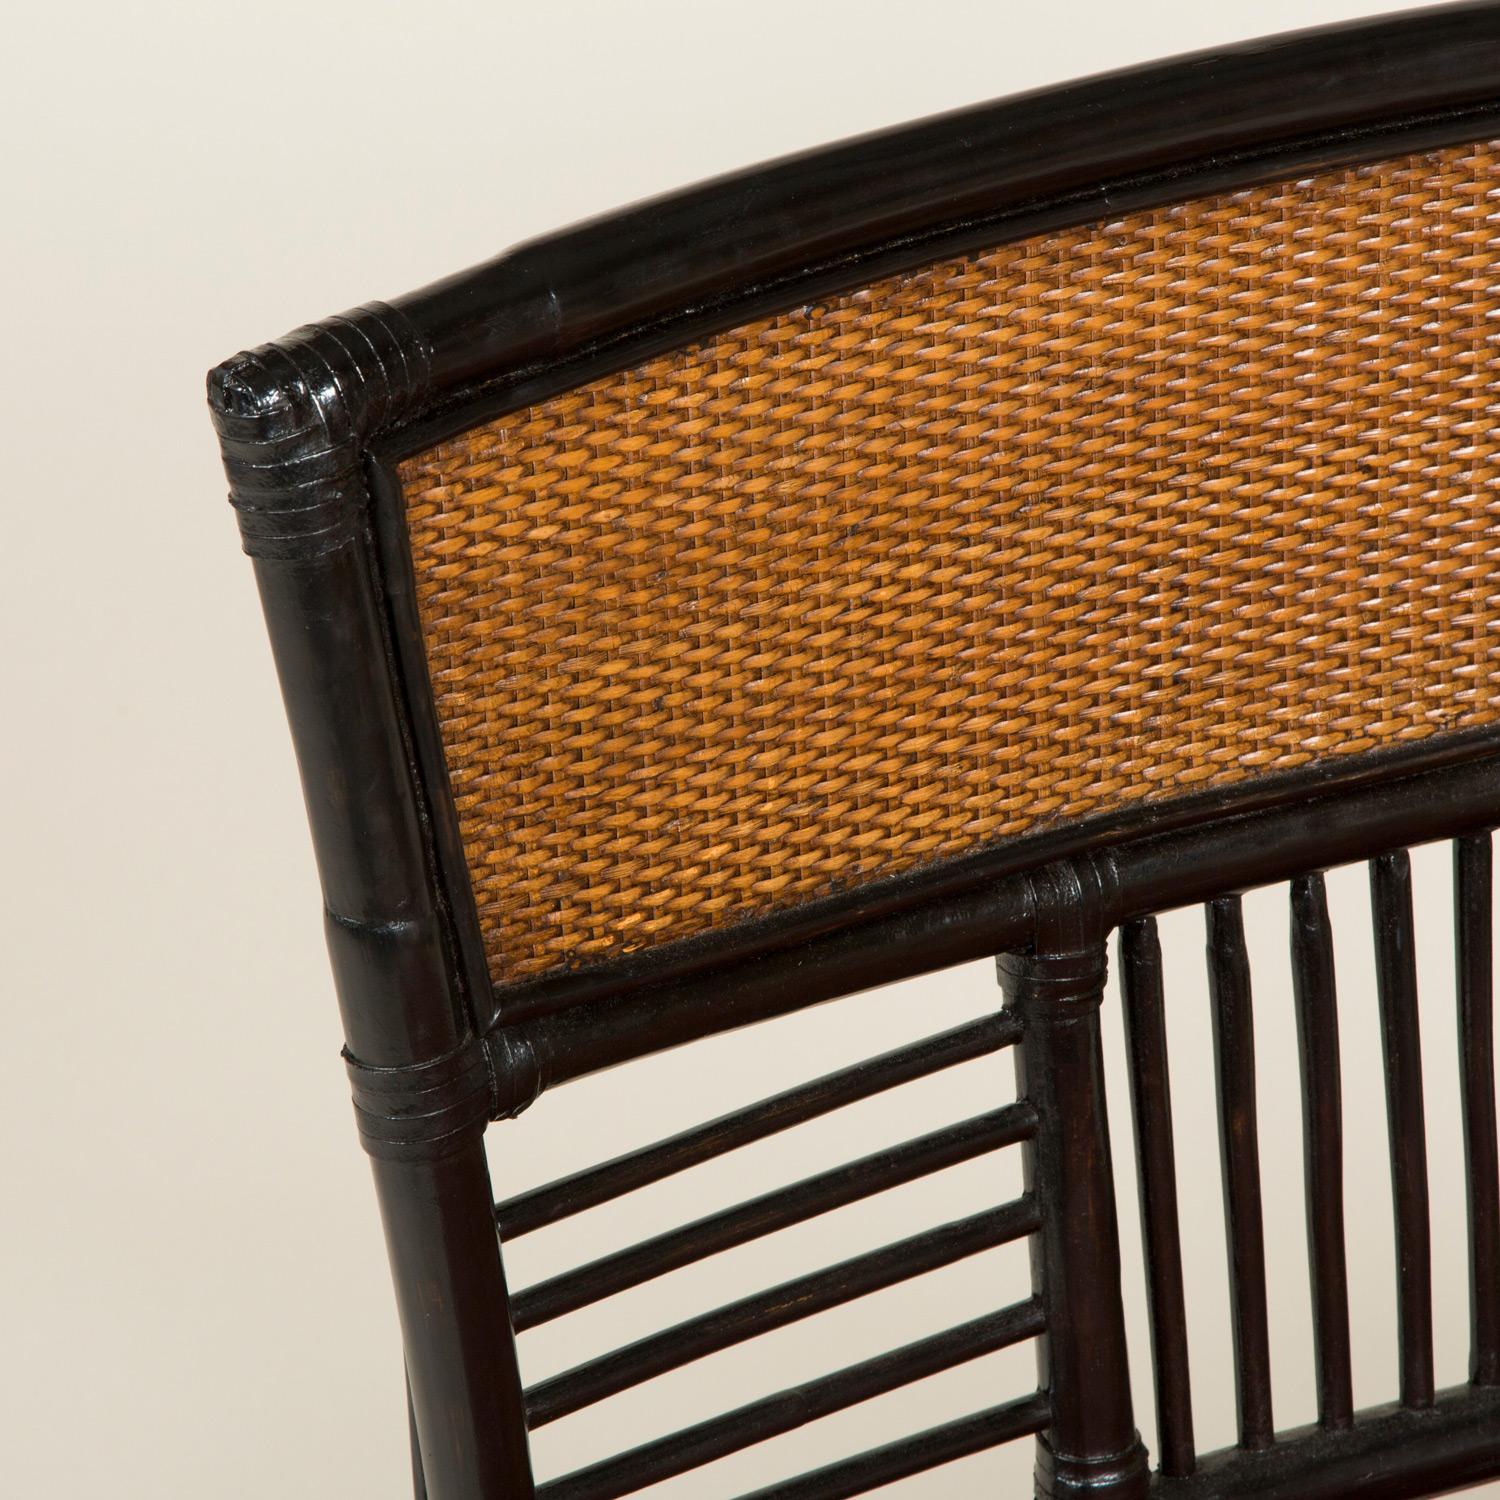 A low Japanese side chair with a slatted frame and caned back and seat early 20th century.